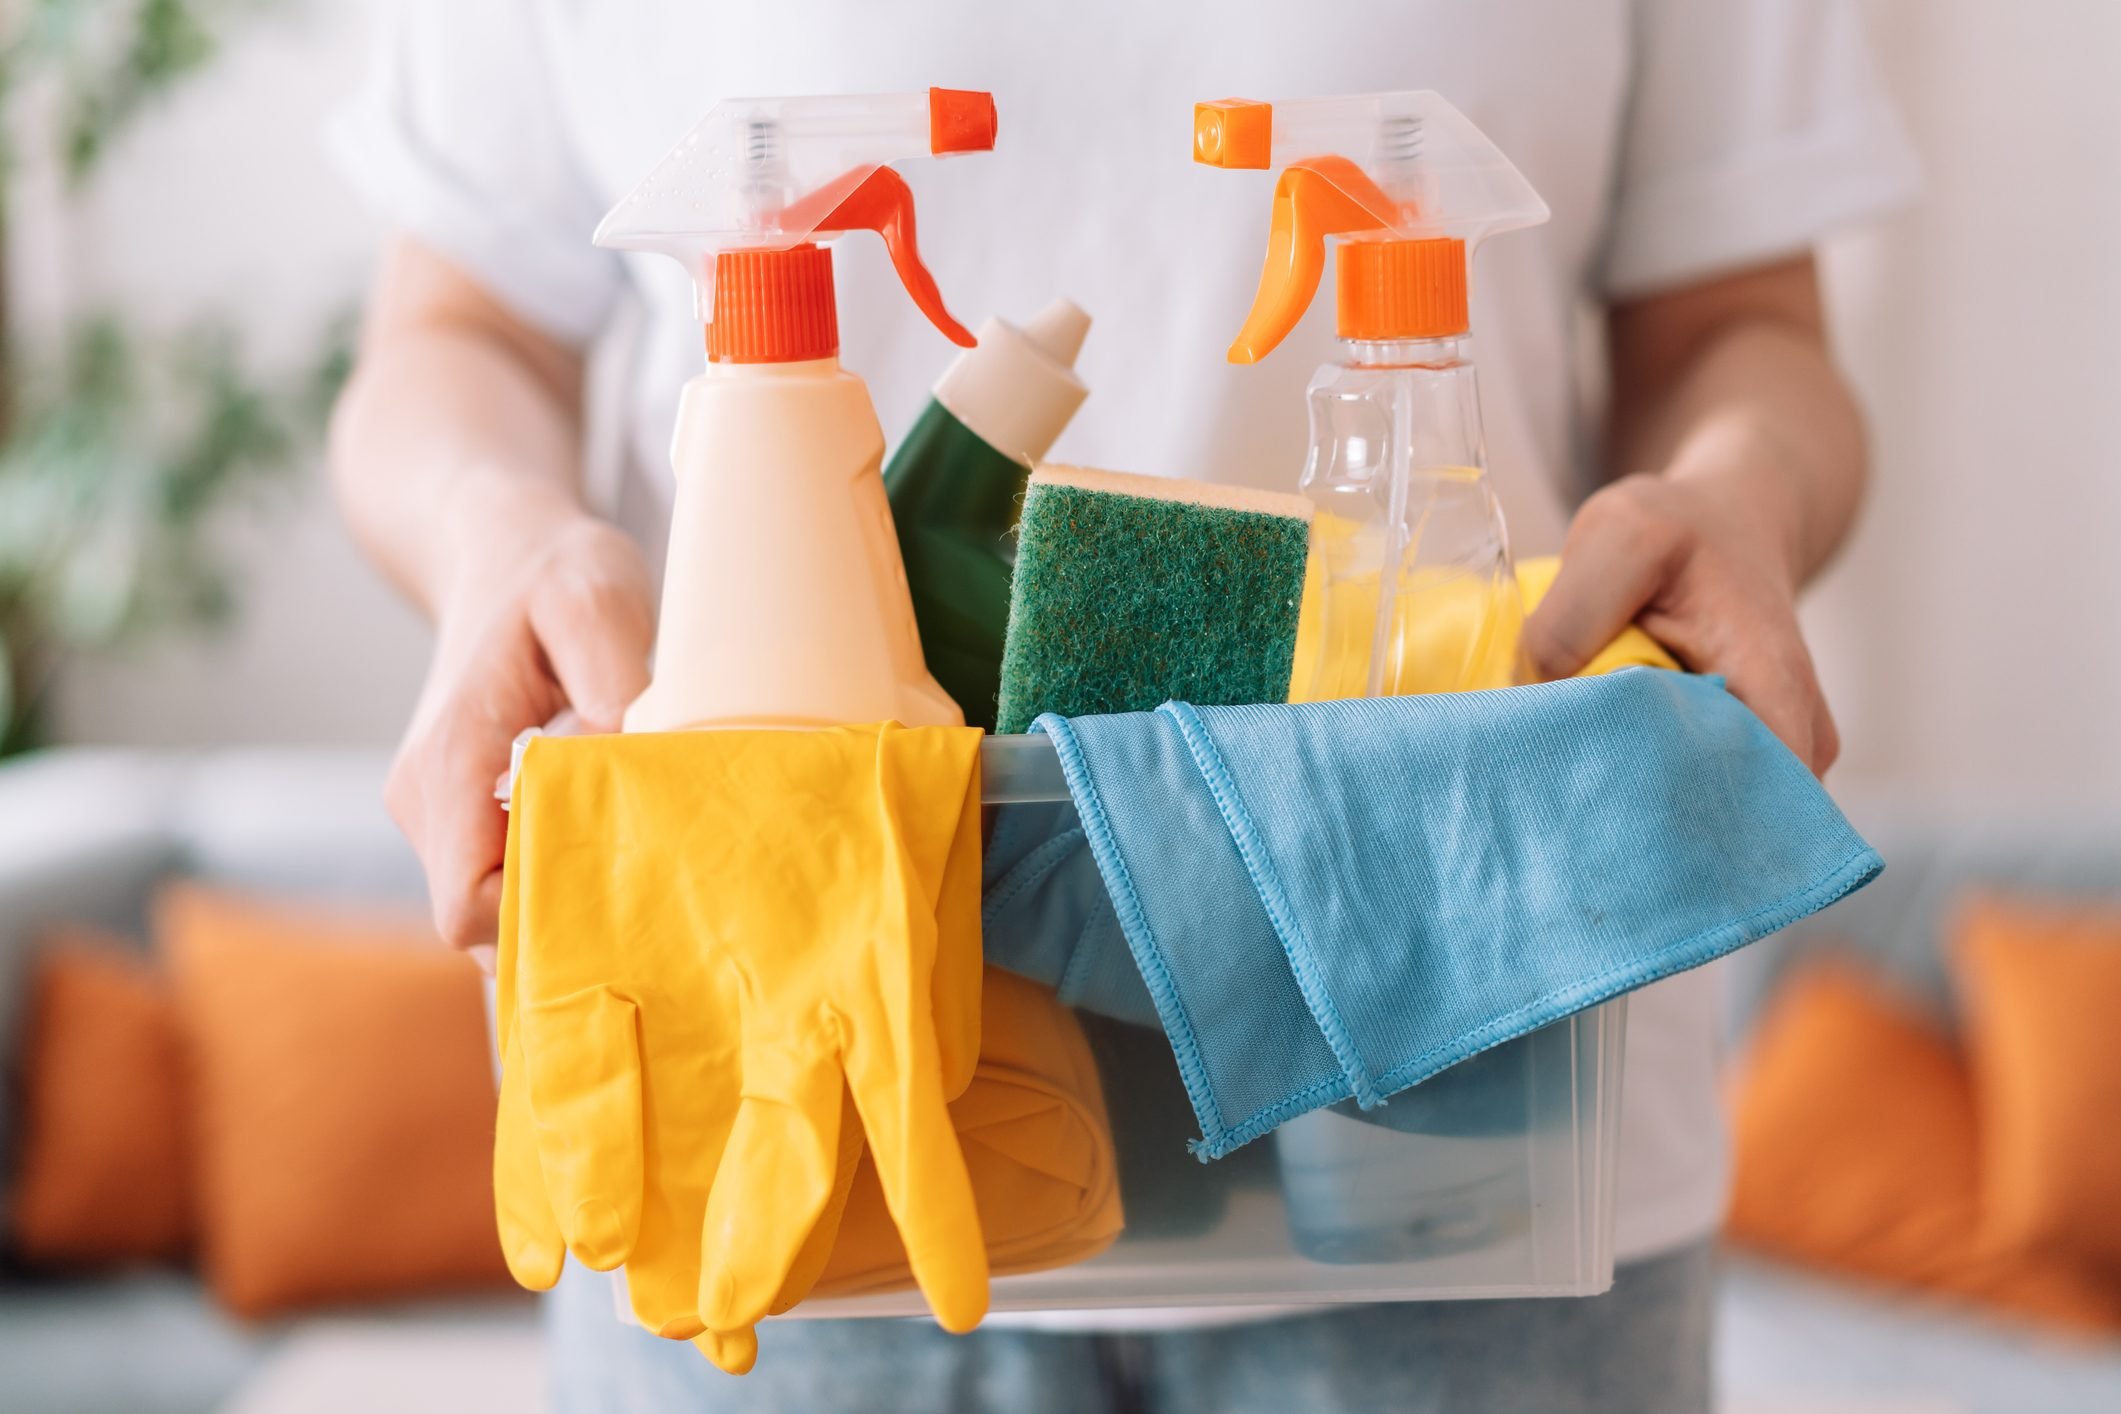 45 Easy Cleaning Hacks For Every Space In Your Home